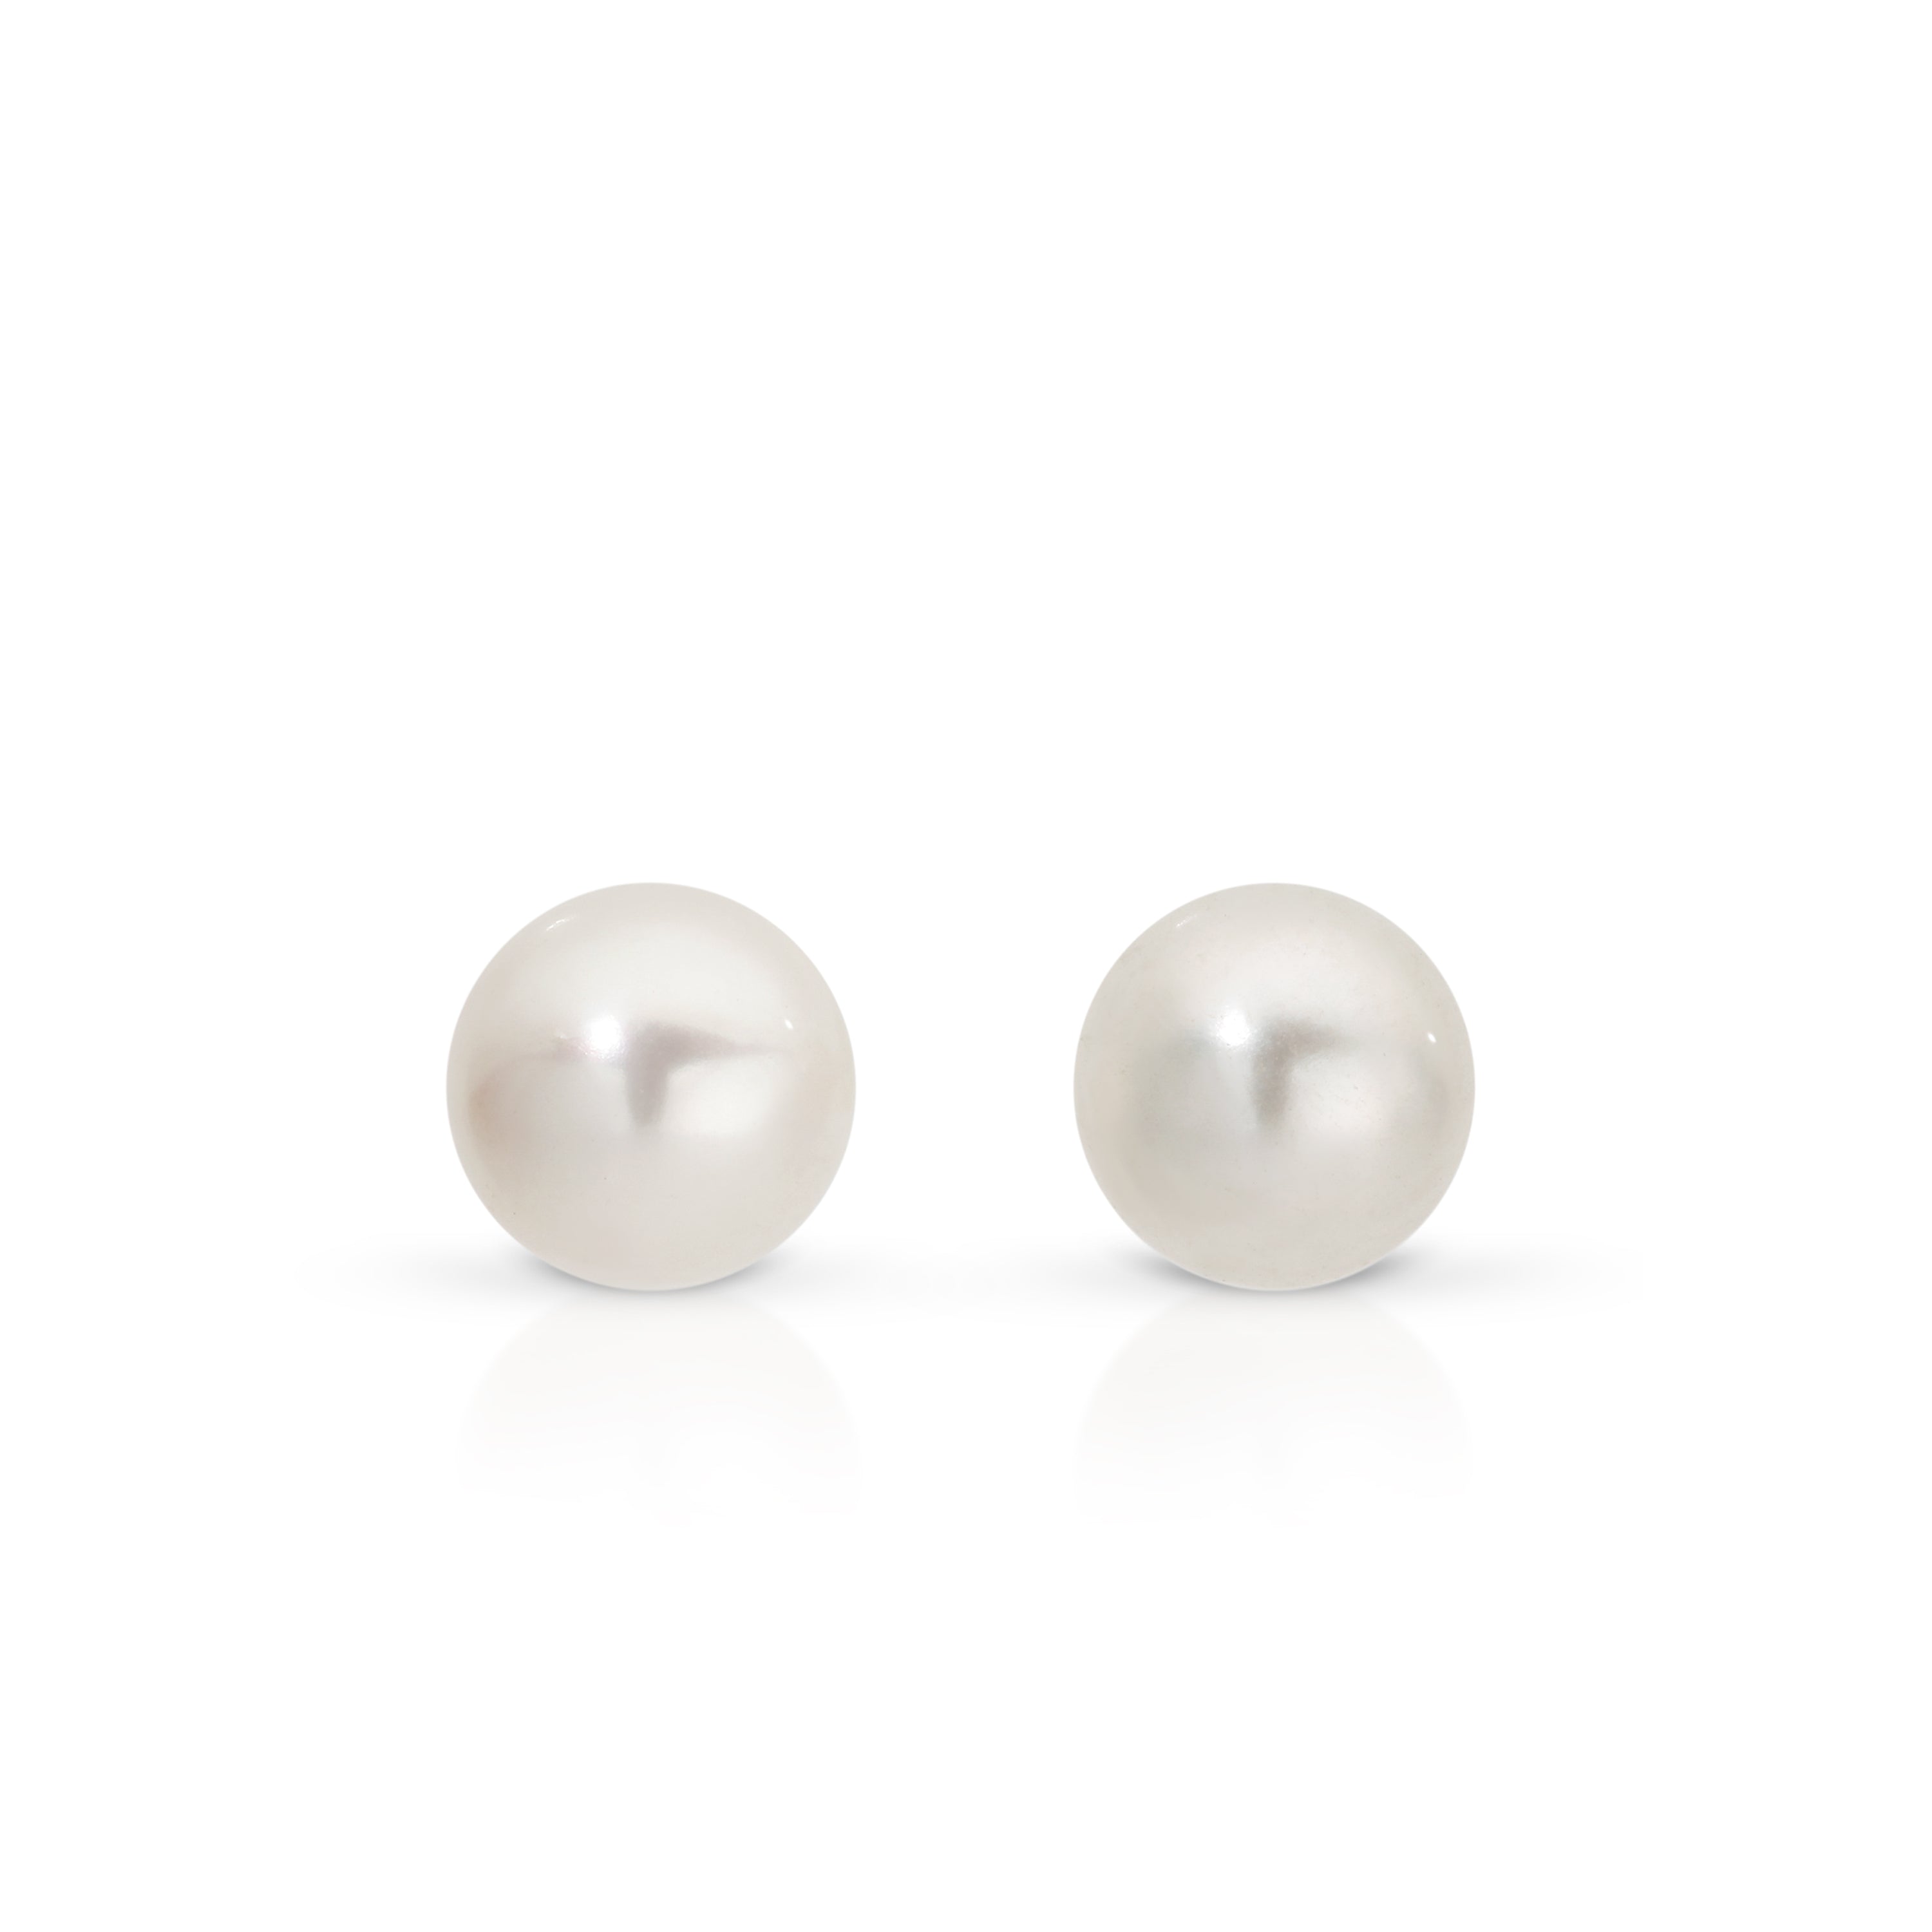 Silver 4mm freshwater pearl studs